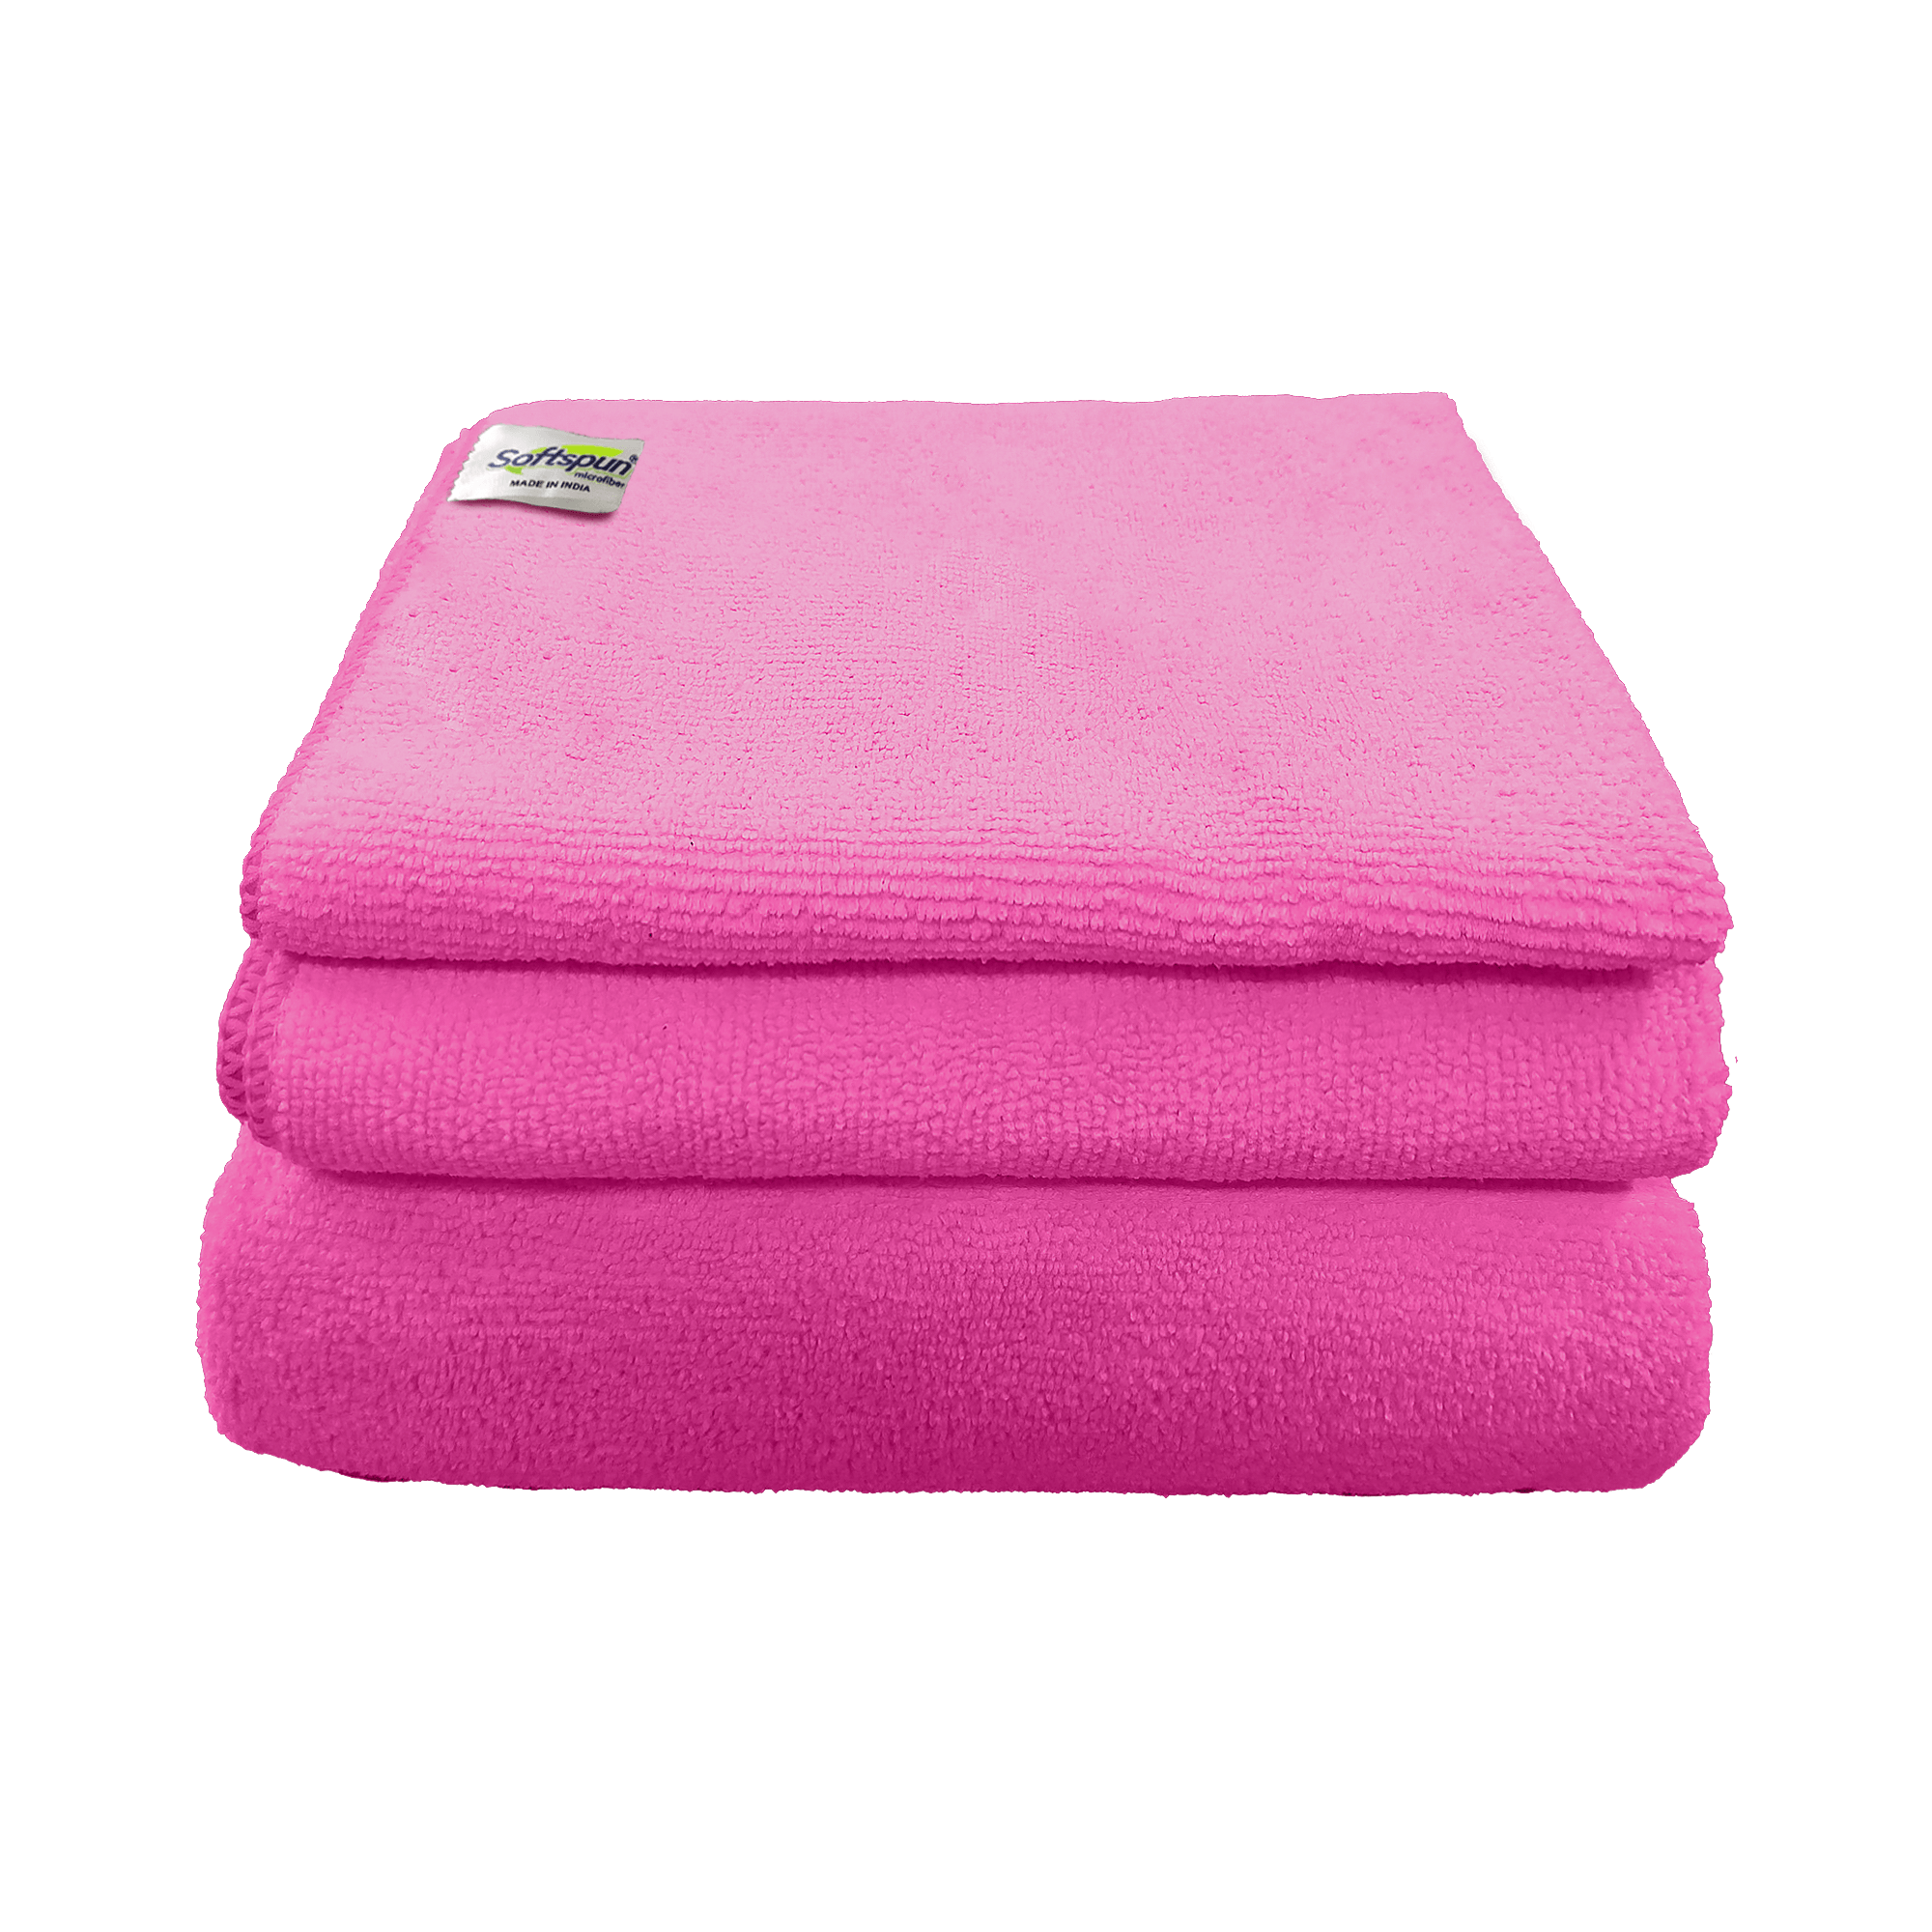 SOFTSPUN Microfiber Baby Face & Bath Towel Set of 3 Pieces, 340 GSM, Super Soft & Comfortable for Newborn Babies, Quick Drying, Ultra Absorbent in Large size.